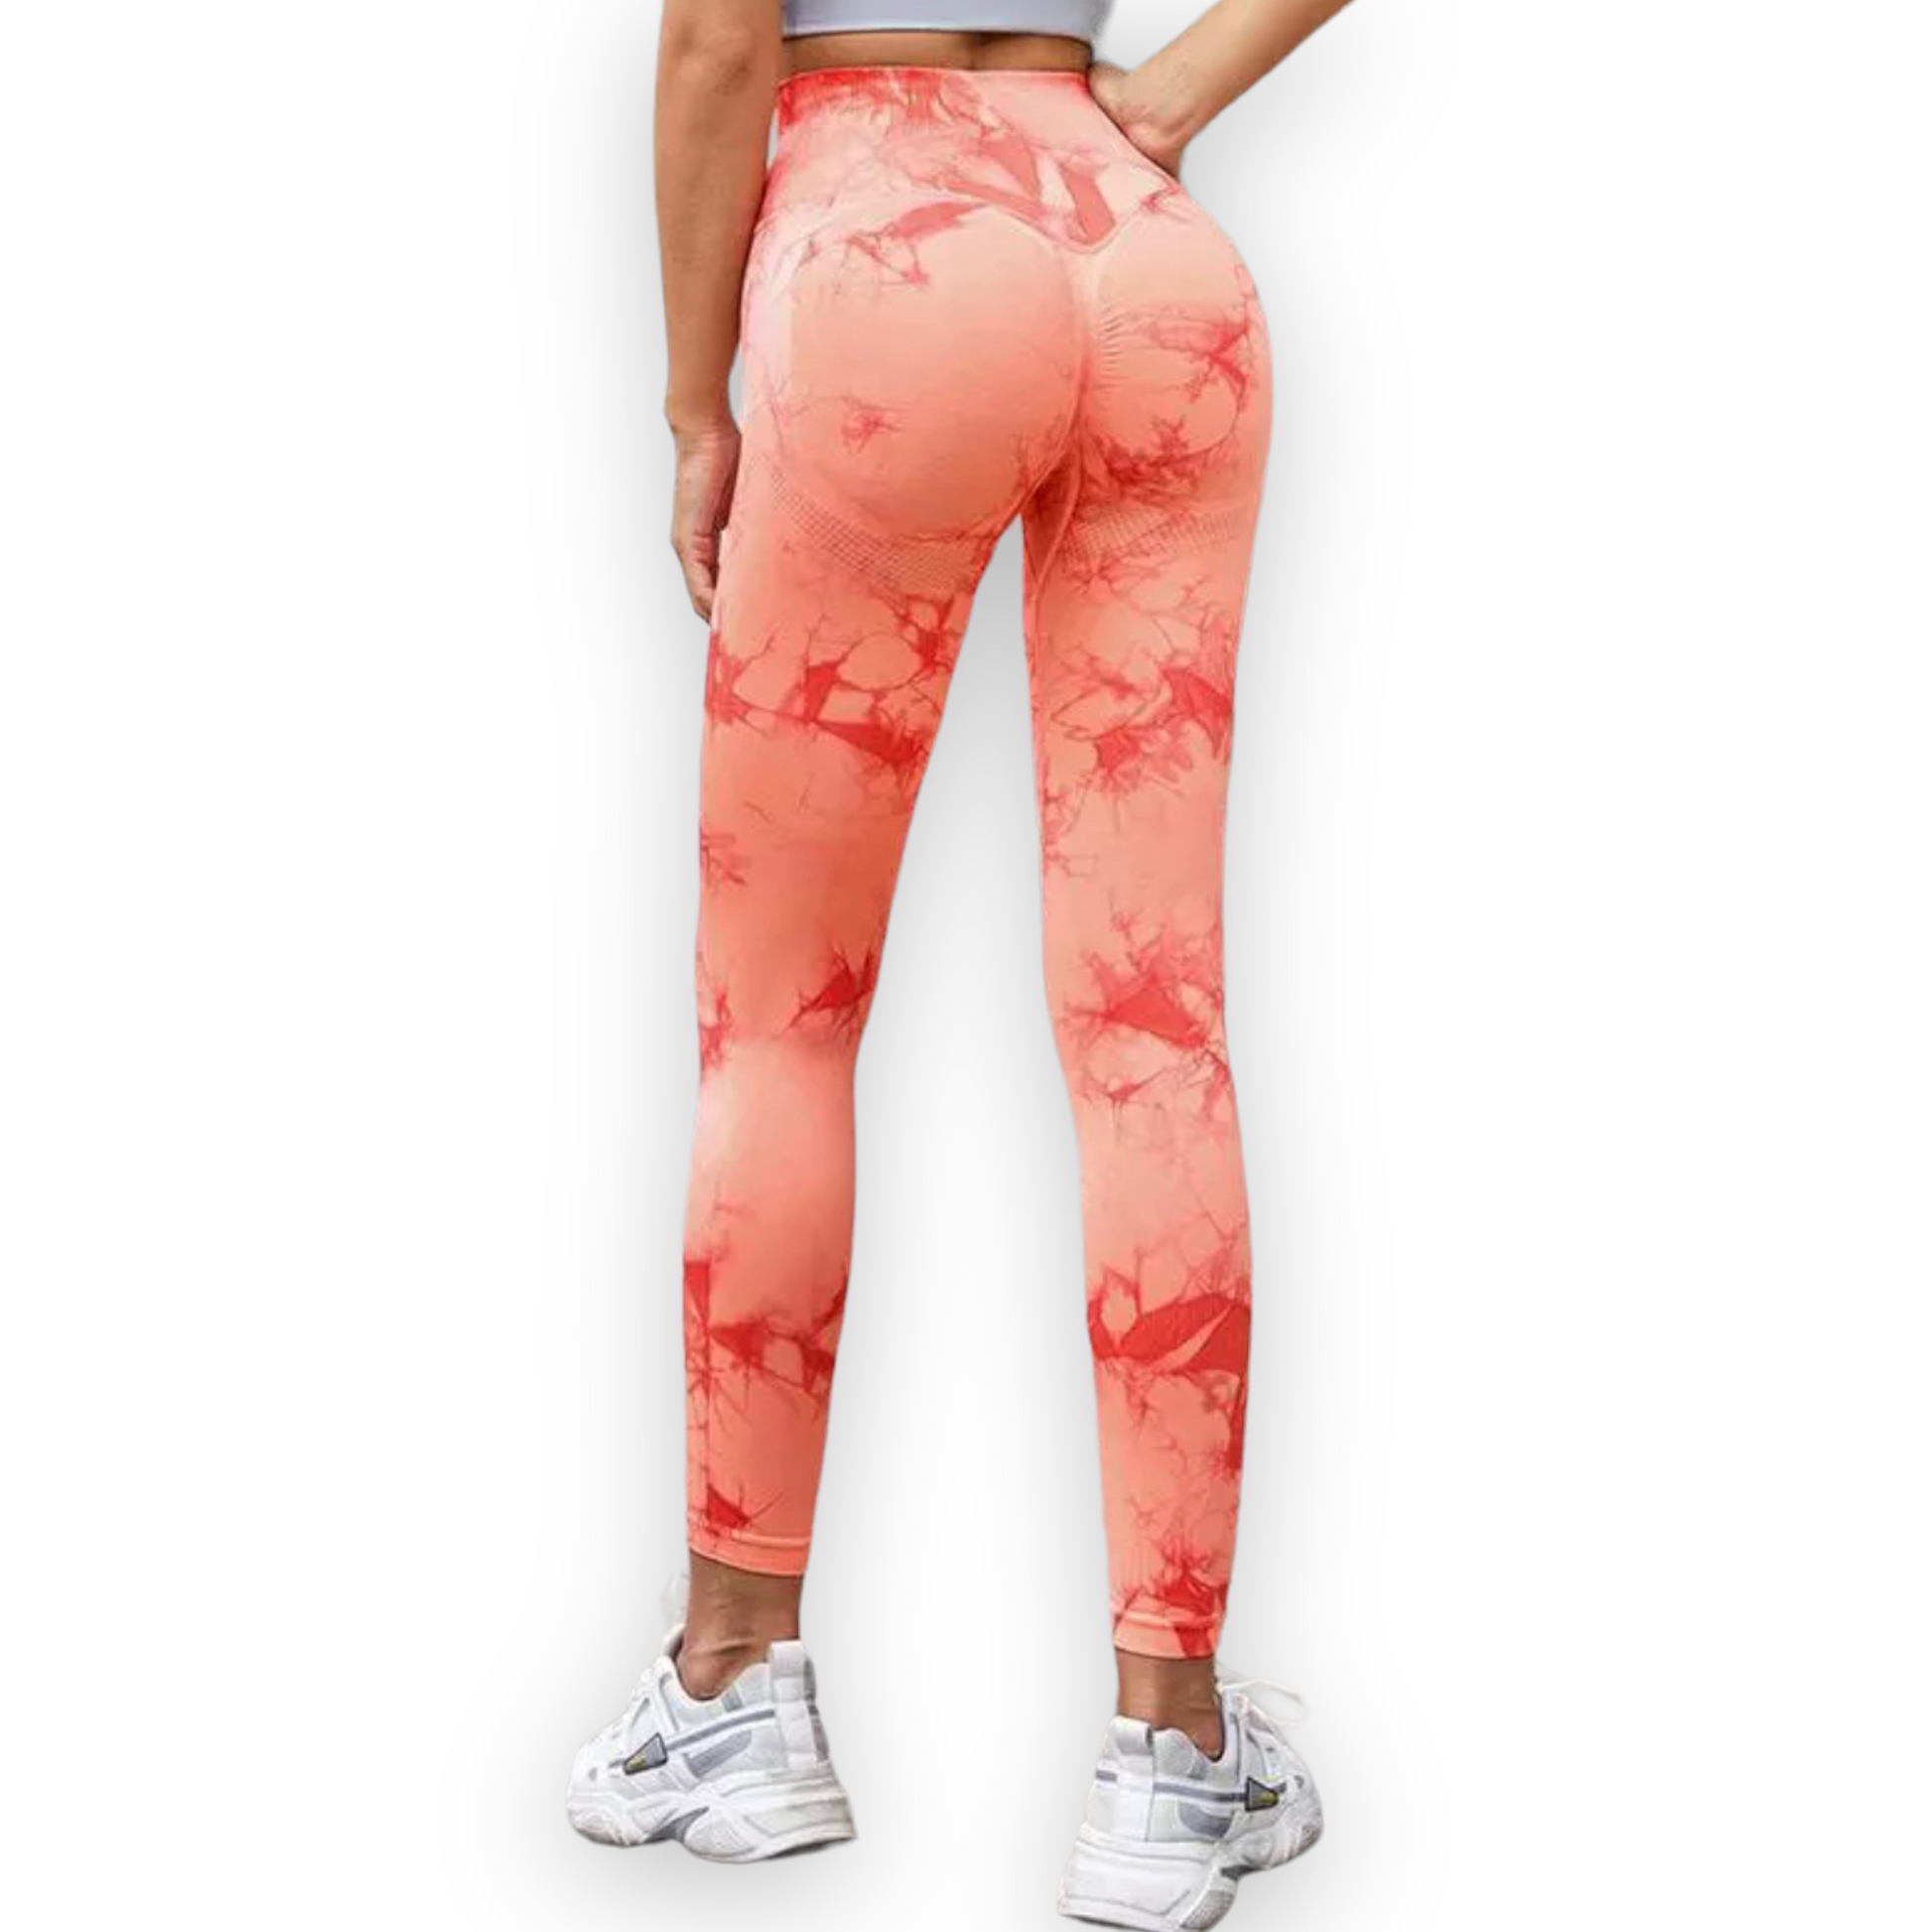 Size L/XL Tie Dye Brushed Leggings Small Snag See Pictures-makes butt look  Nice